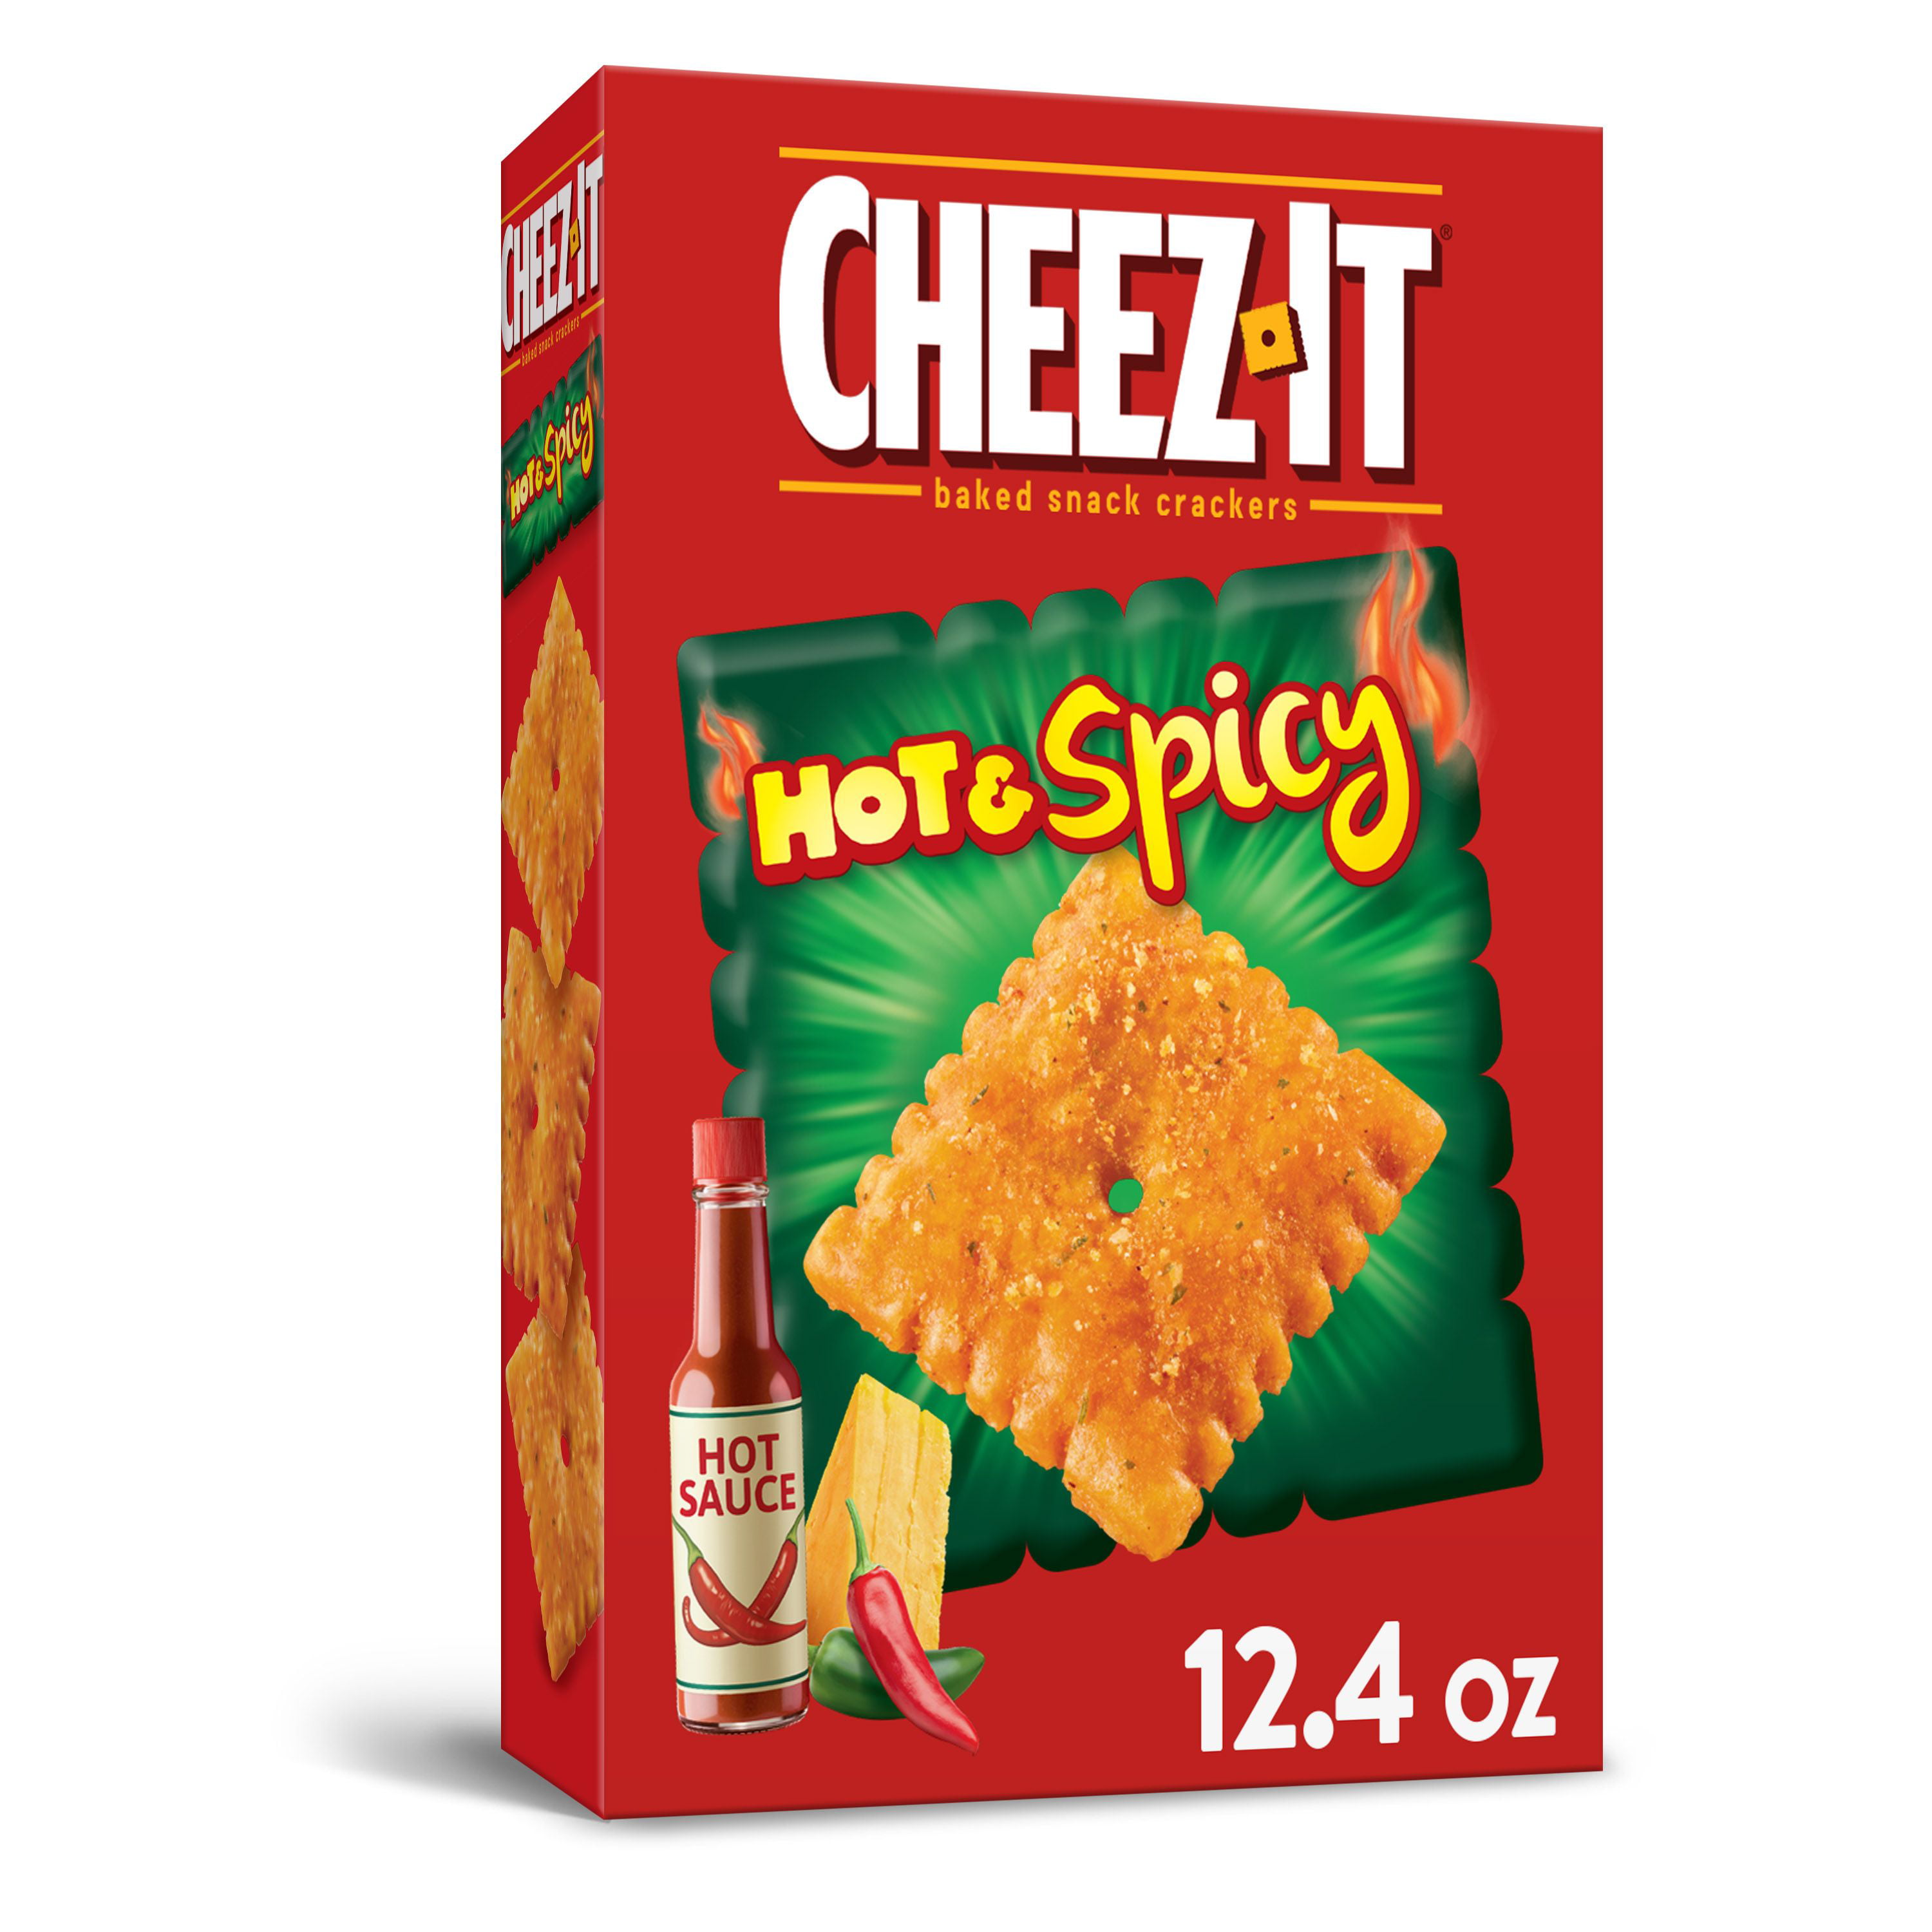 Cheez-It Cheese Crackers, Baked Snack Crackers, Hot and Spicy, 12.4 Oz, Box...